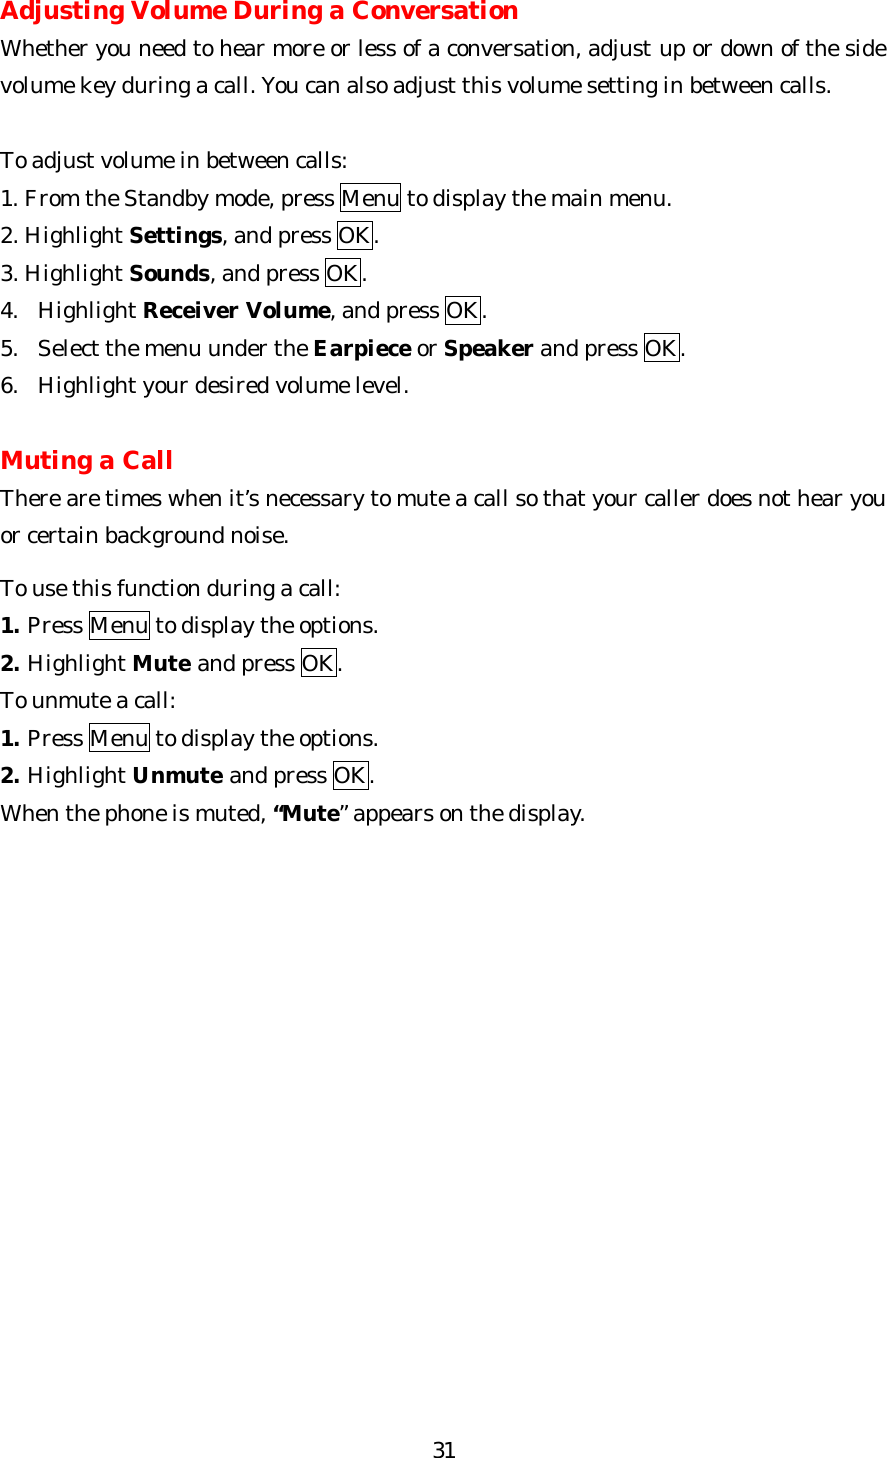   31Adjusting Volume During a Conversation Whether you need to hear more or less of a conversation, adjust up or down of the side volume key during a call. You can also adjust this volume setting in between calls.  To adjust volume in between calls: 1. From the Standby mode, press Menu to display the main menu. 2. Highlight Settings, and press OK. 3. Highlight Sounds, and press OK. 4. Highlight Receiver Volume, and press OK. 5. Select the menu under the Earpiece or Speaker and press OK. 6. Highlight your desired volume level.  Muting a Call There are times when it’s necessary to mute a call so that your caller does not hear you or certain background noise.  To use this function during a call: 1. Press Menu to display the options. 2. Highlight Mute and press OK. To unmute a call: 1. Press Menu to display the options. 2. Highlight Unmute and press OK. When the phone is muted, “Mute” appears on the display.